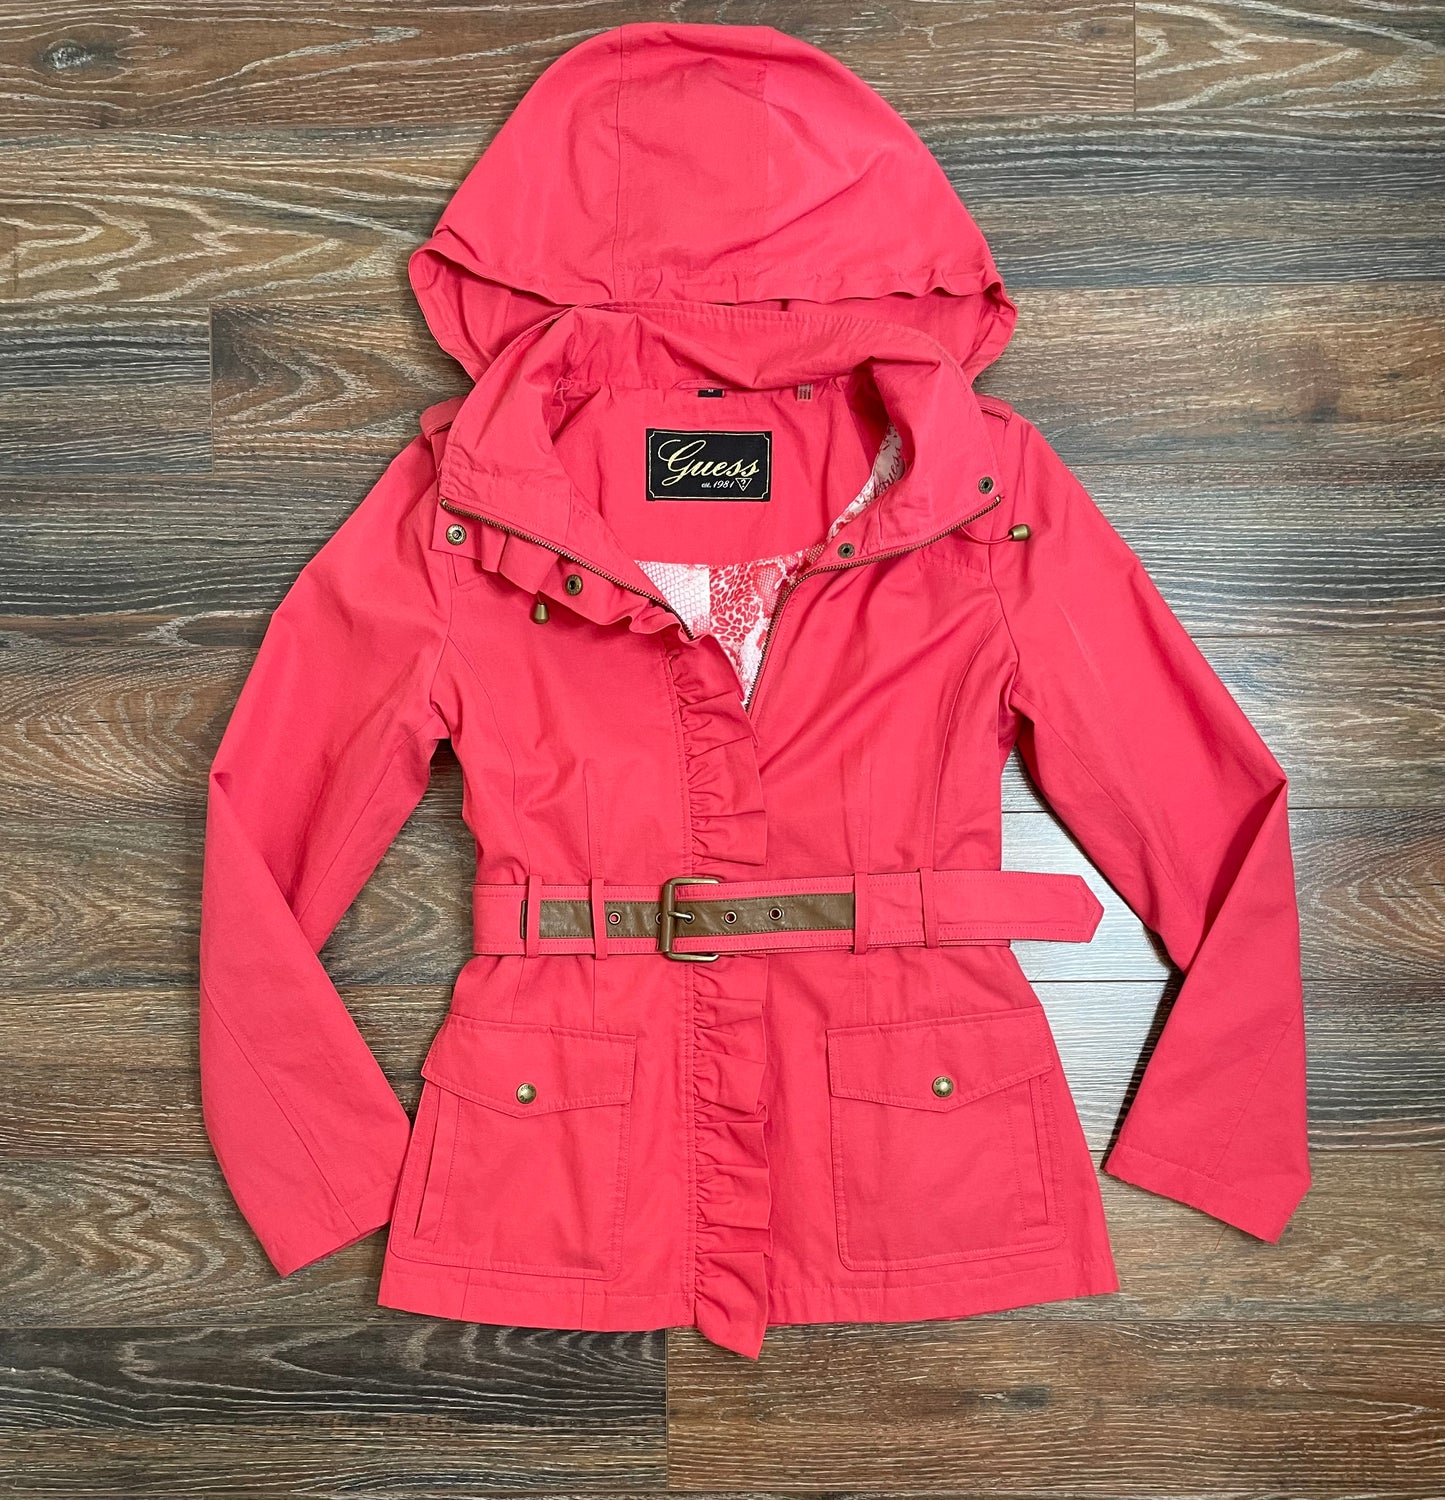 Guess Jacket With Removable Hood